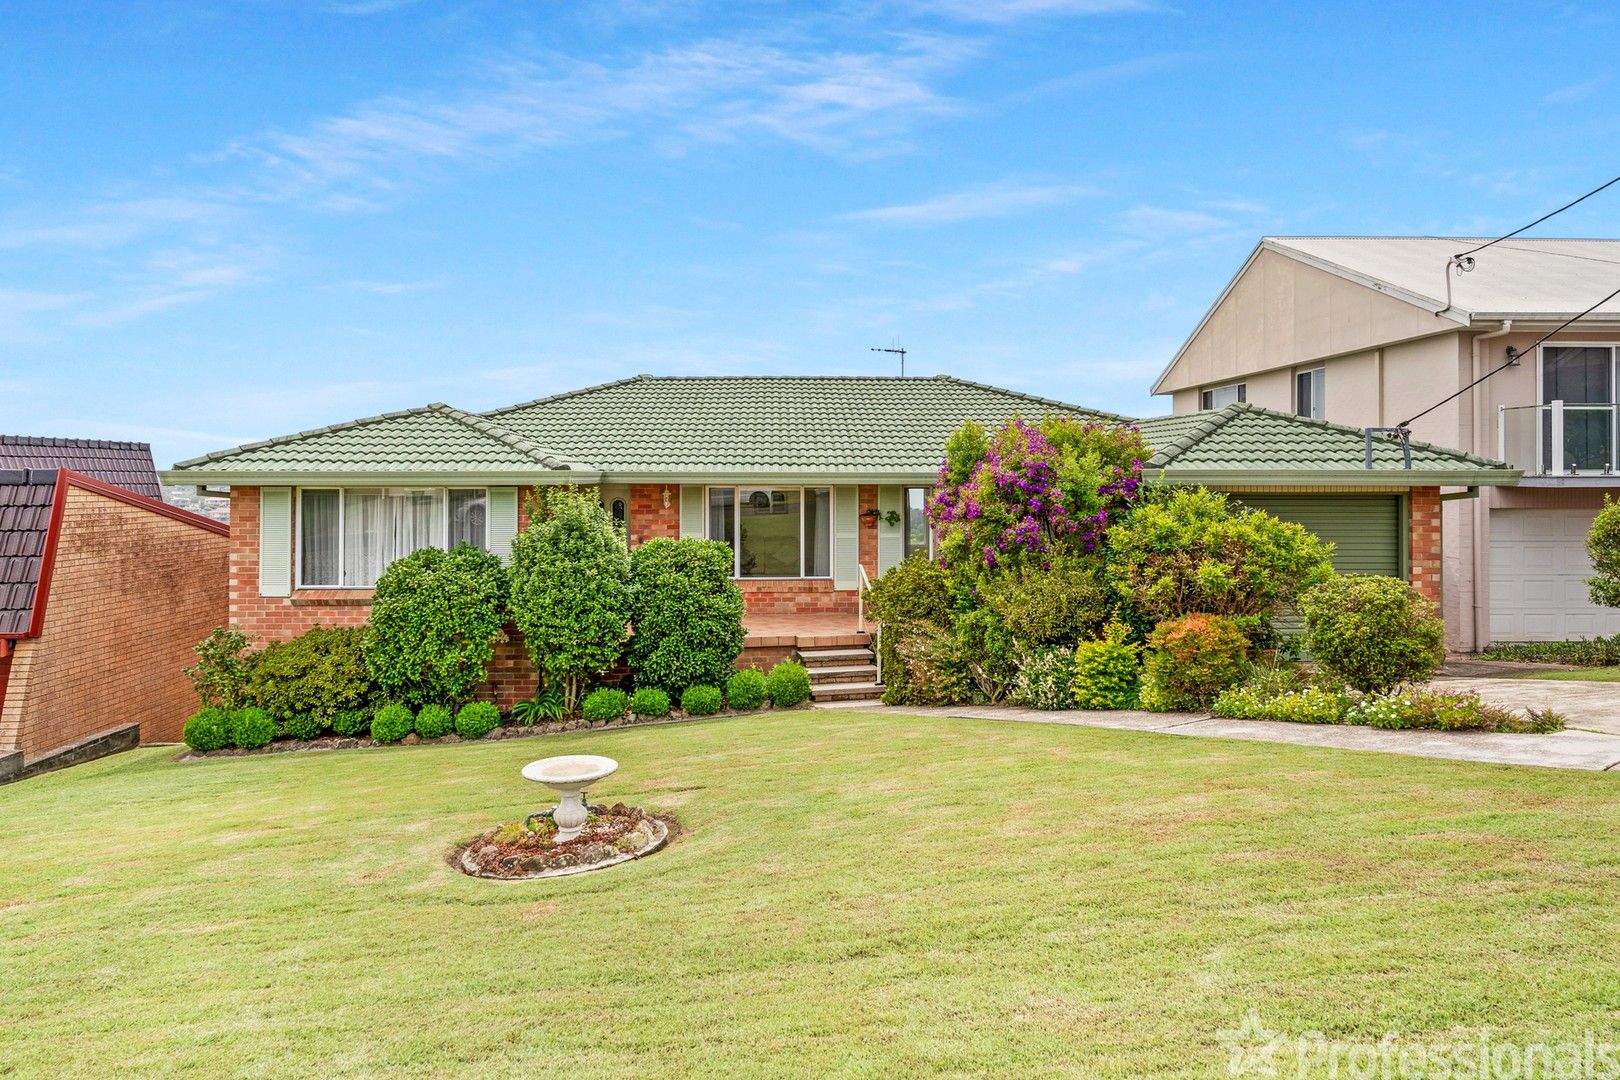 5 bedrooms House in 17 Churchill Road FORSTER NSW, 2428